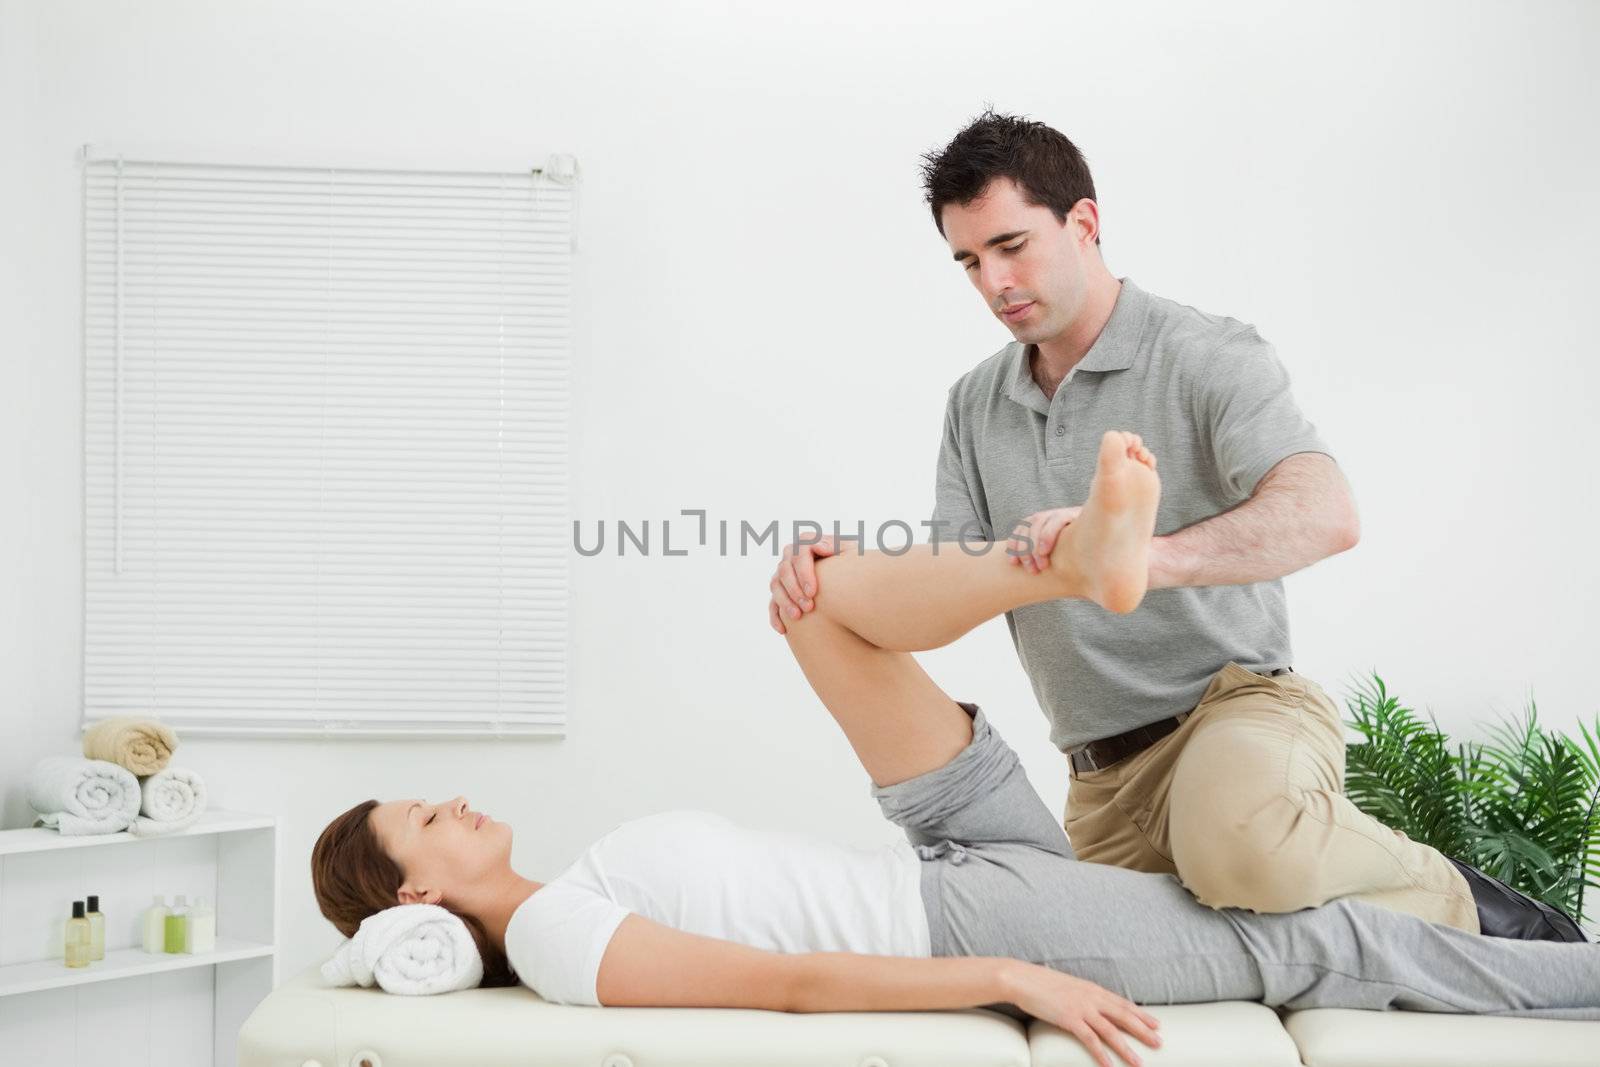 Chiropractor stretching the leg of his patient while holding it in a medical room